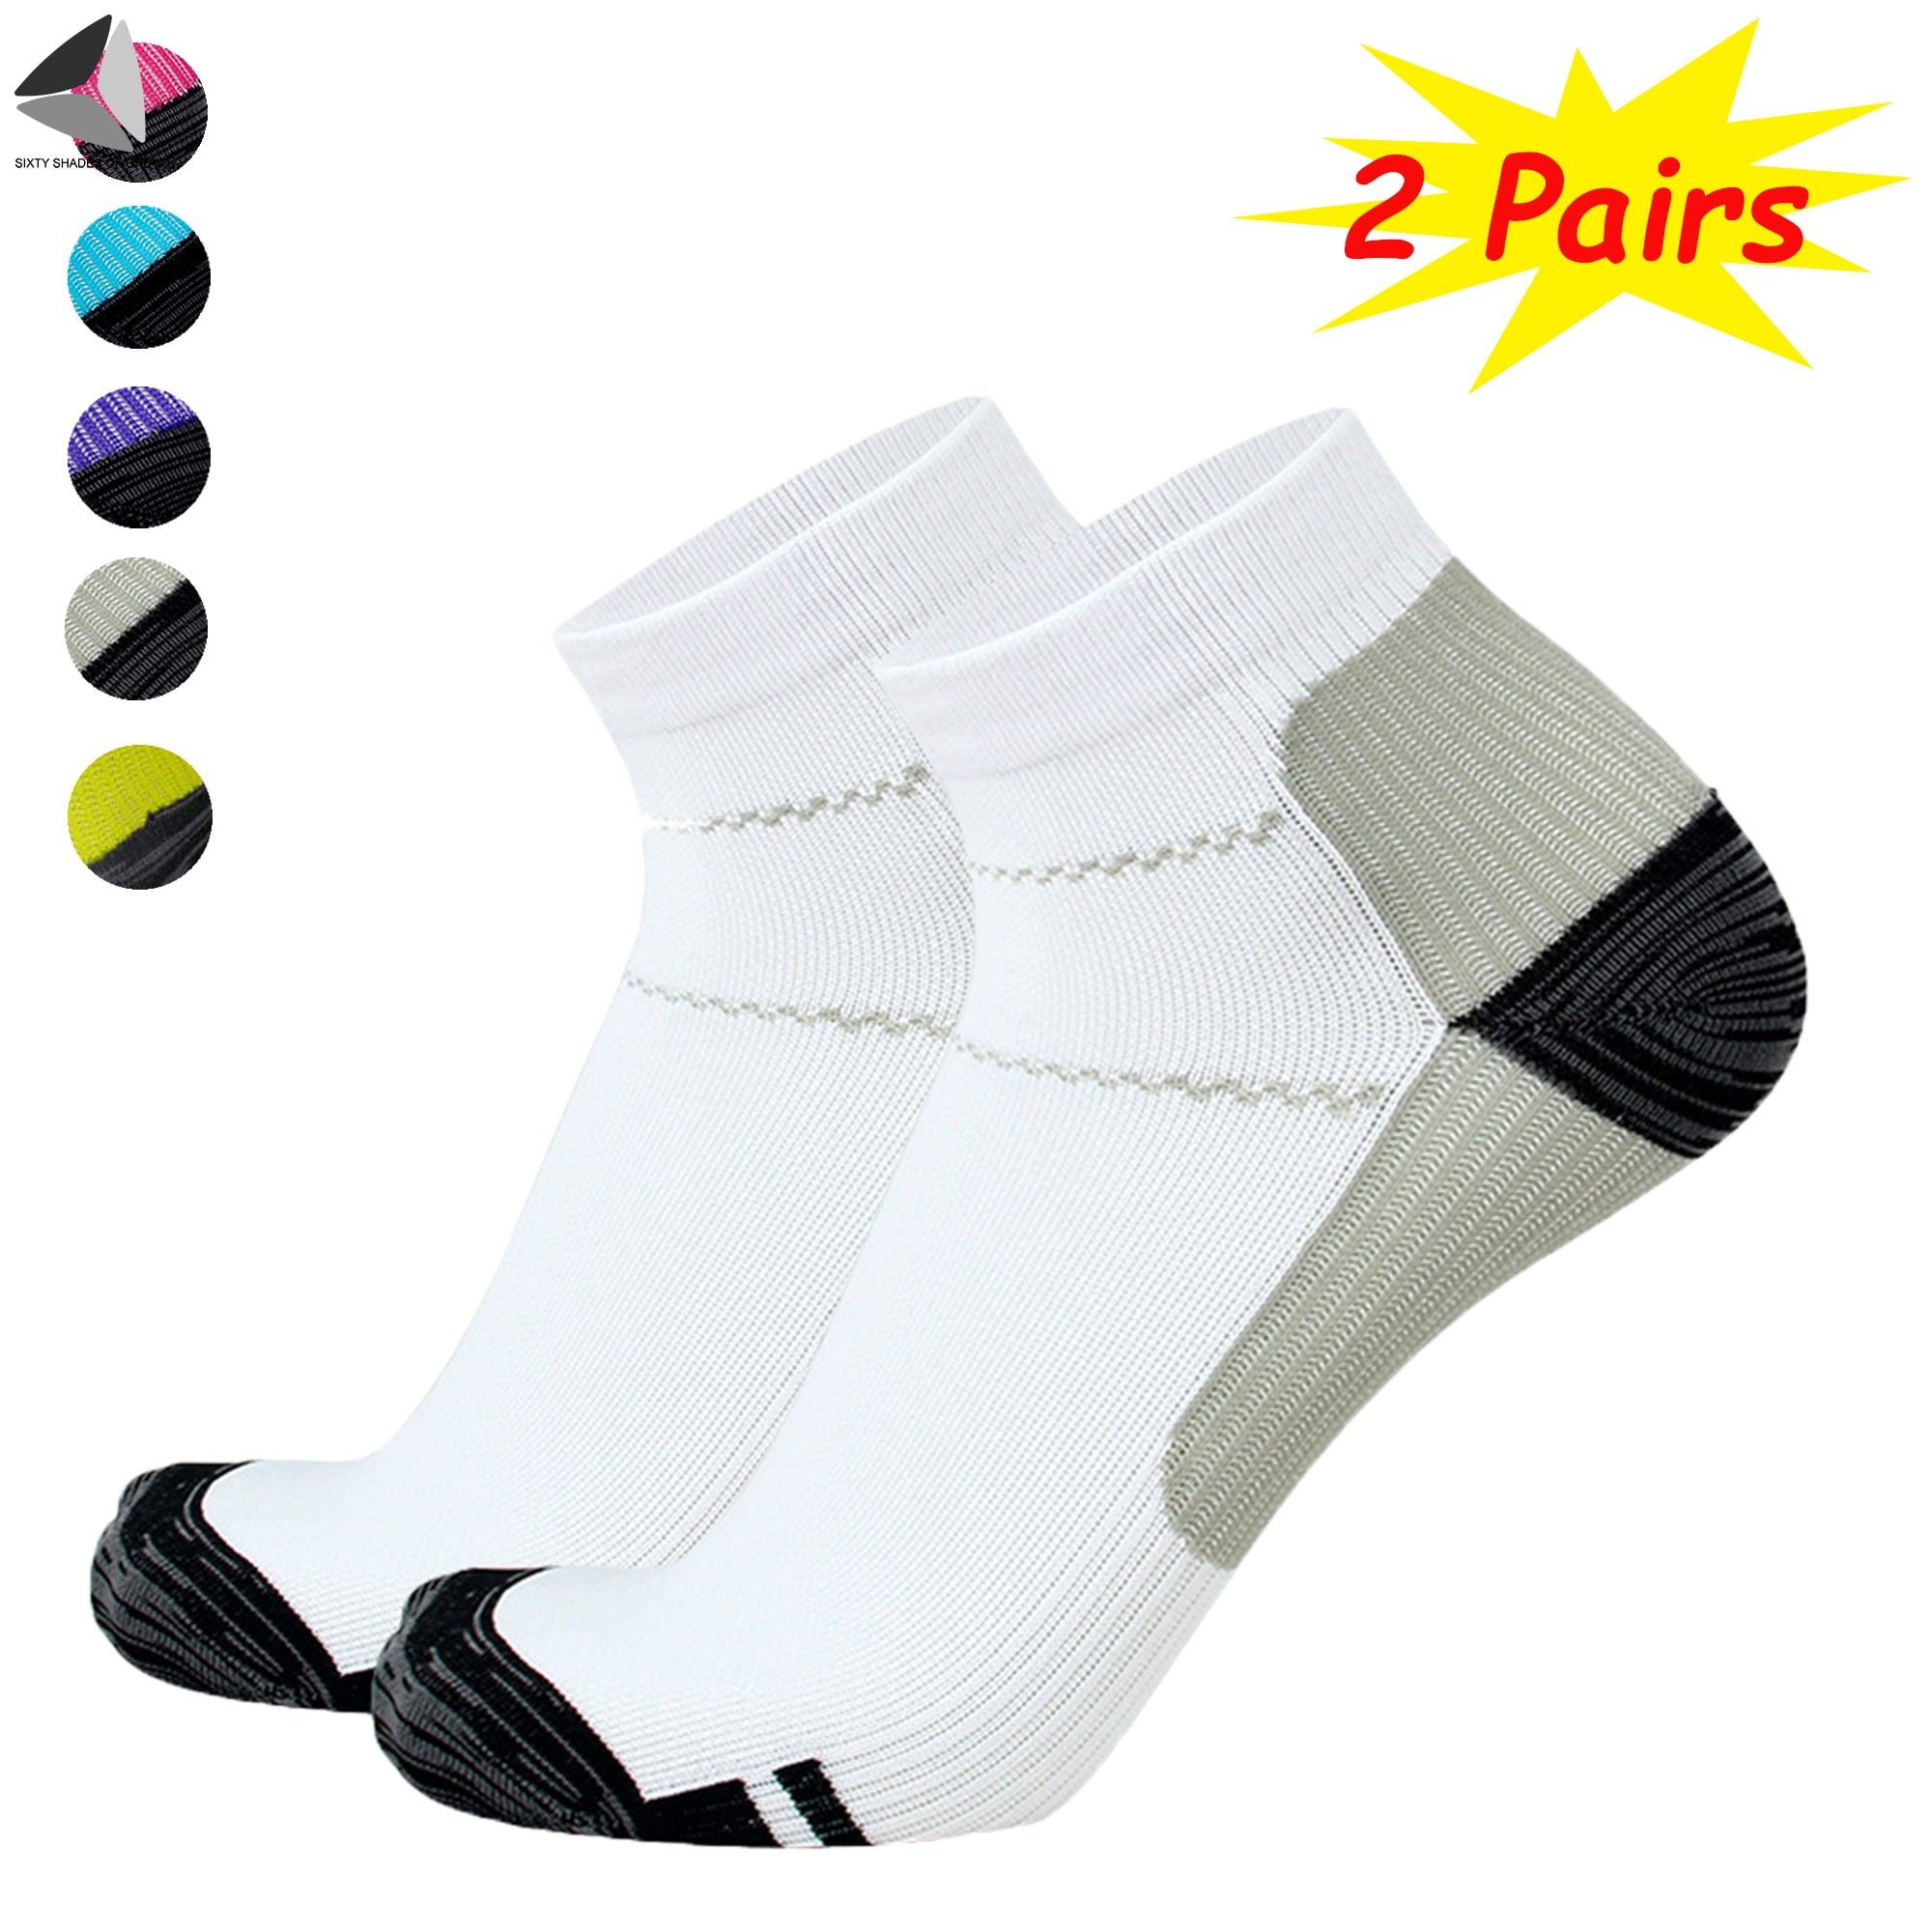 2Pairs Women Candy Color Warm Cotton Blend Ankle Socks Sports Casual Short Socks 